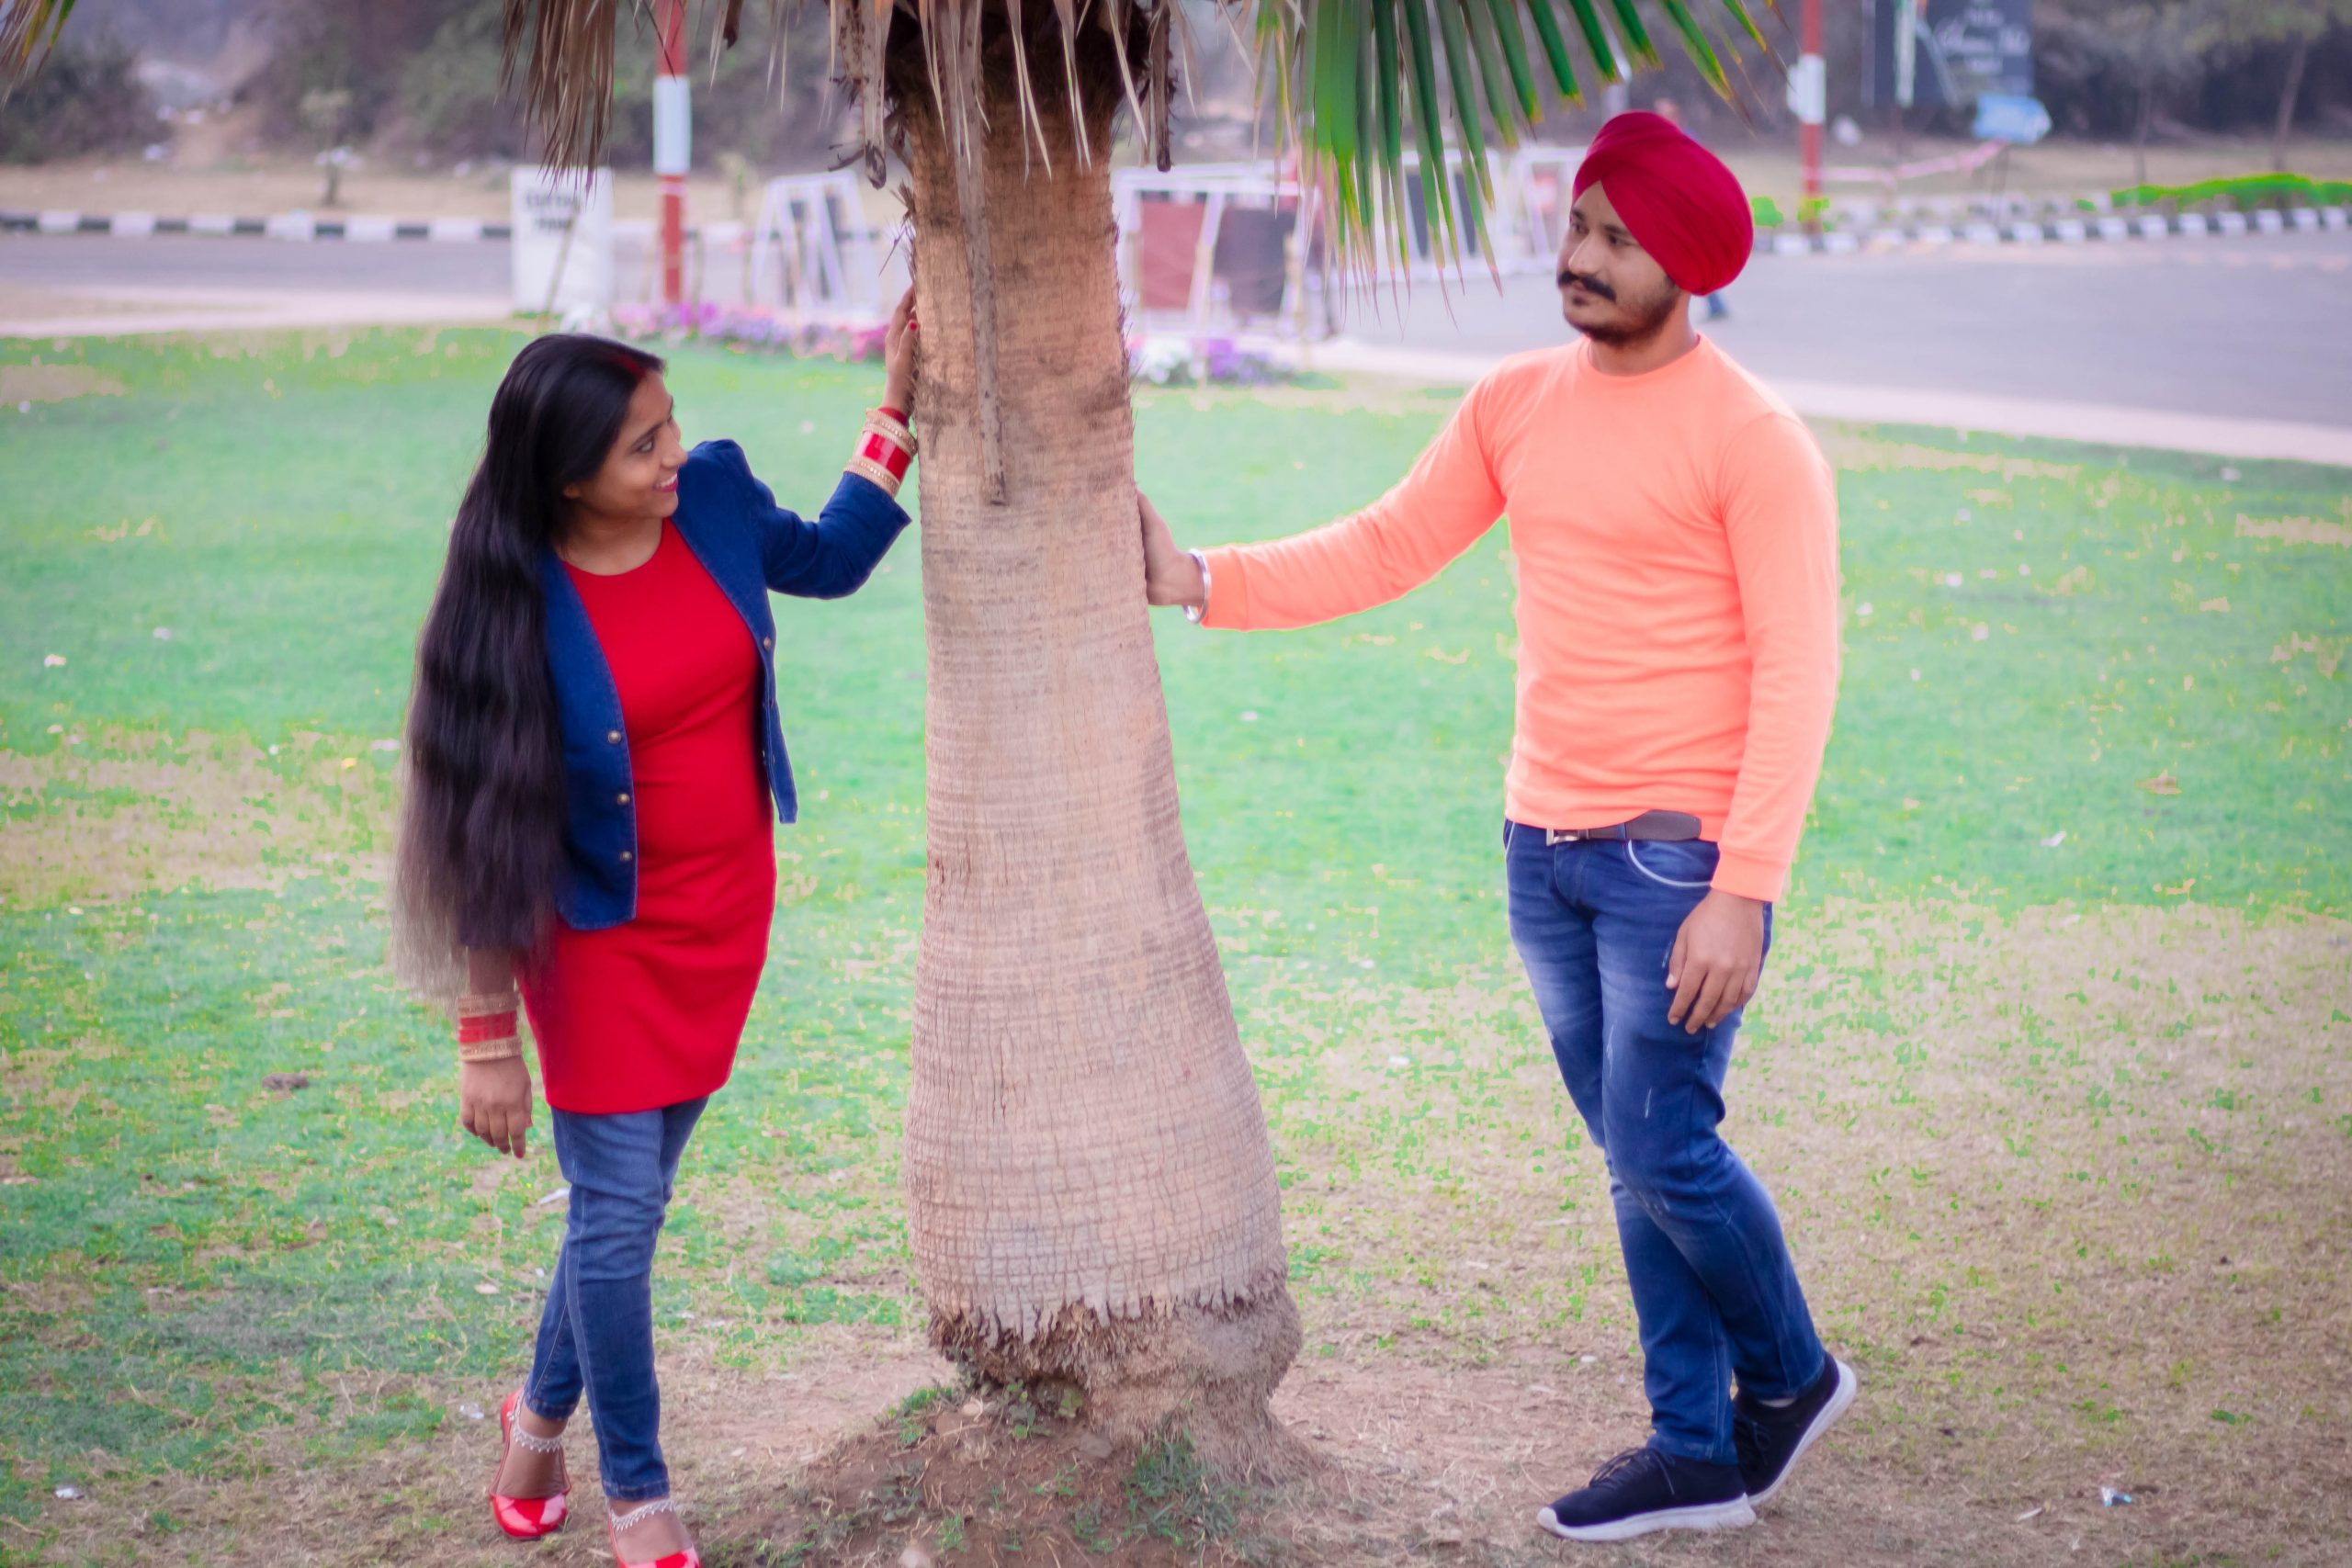 A Sikh couple under a tree